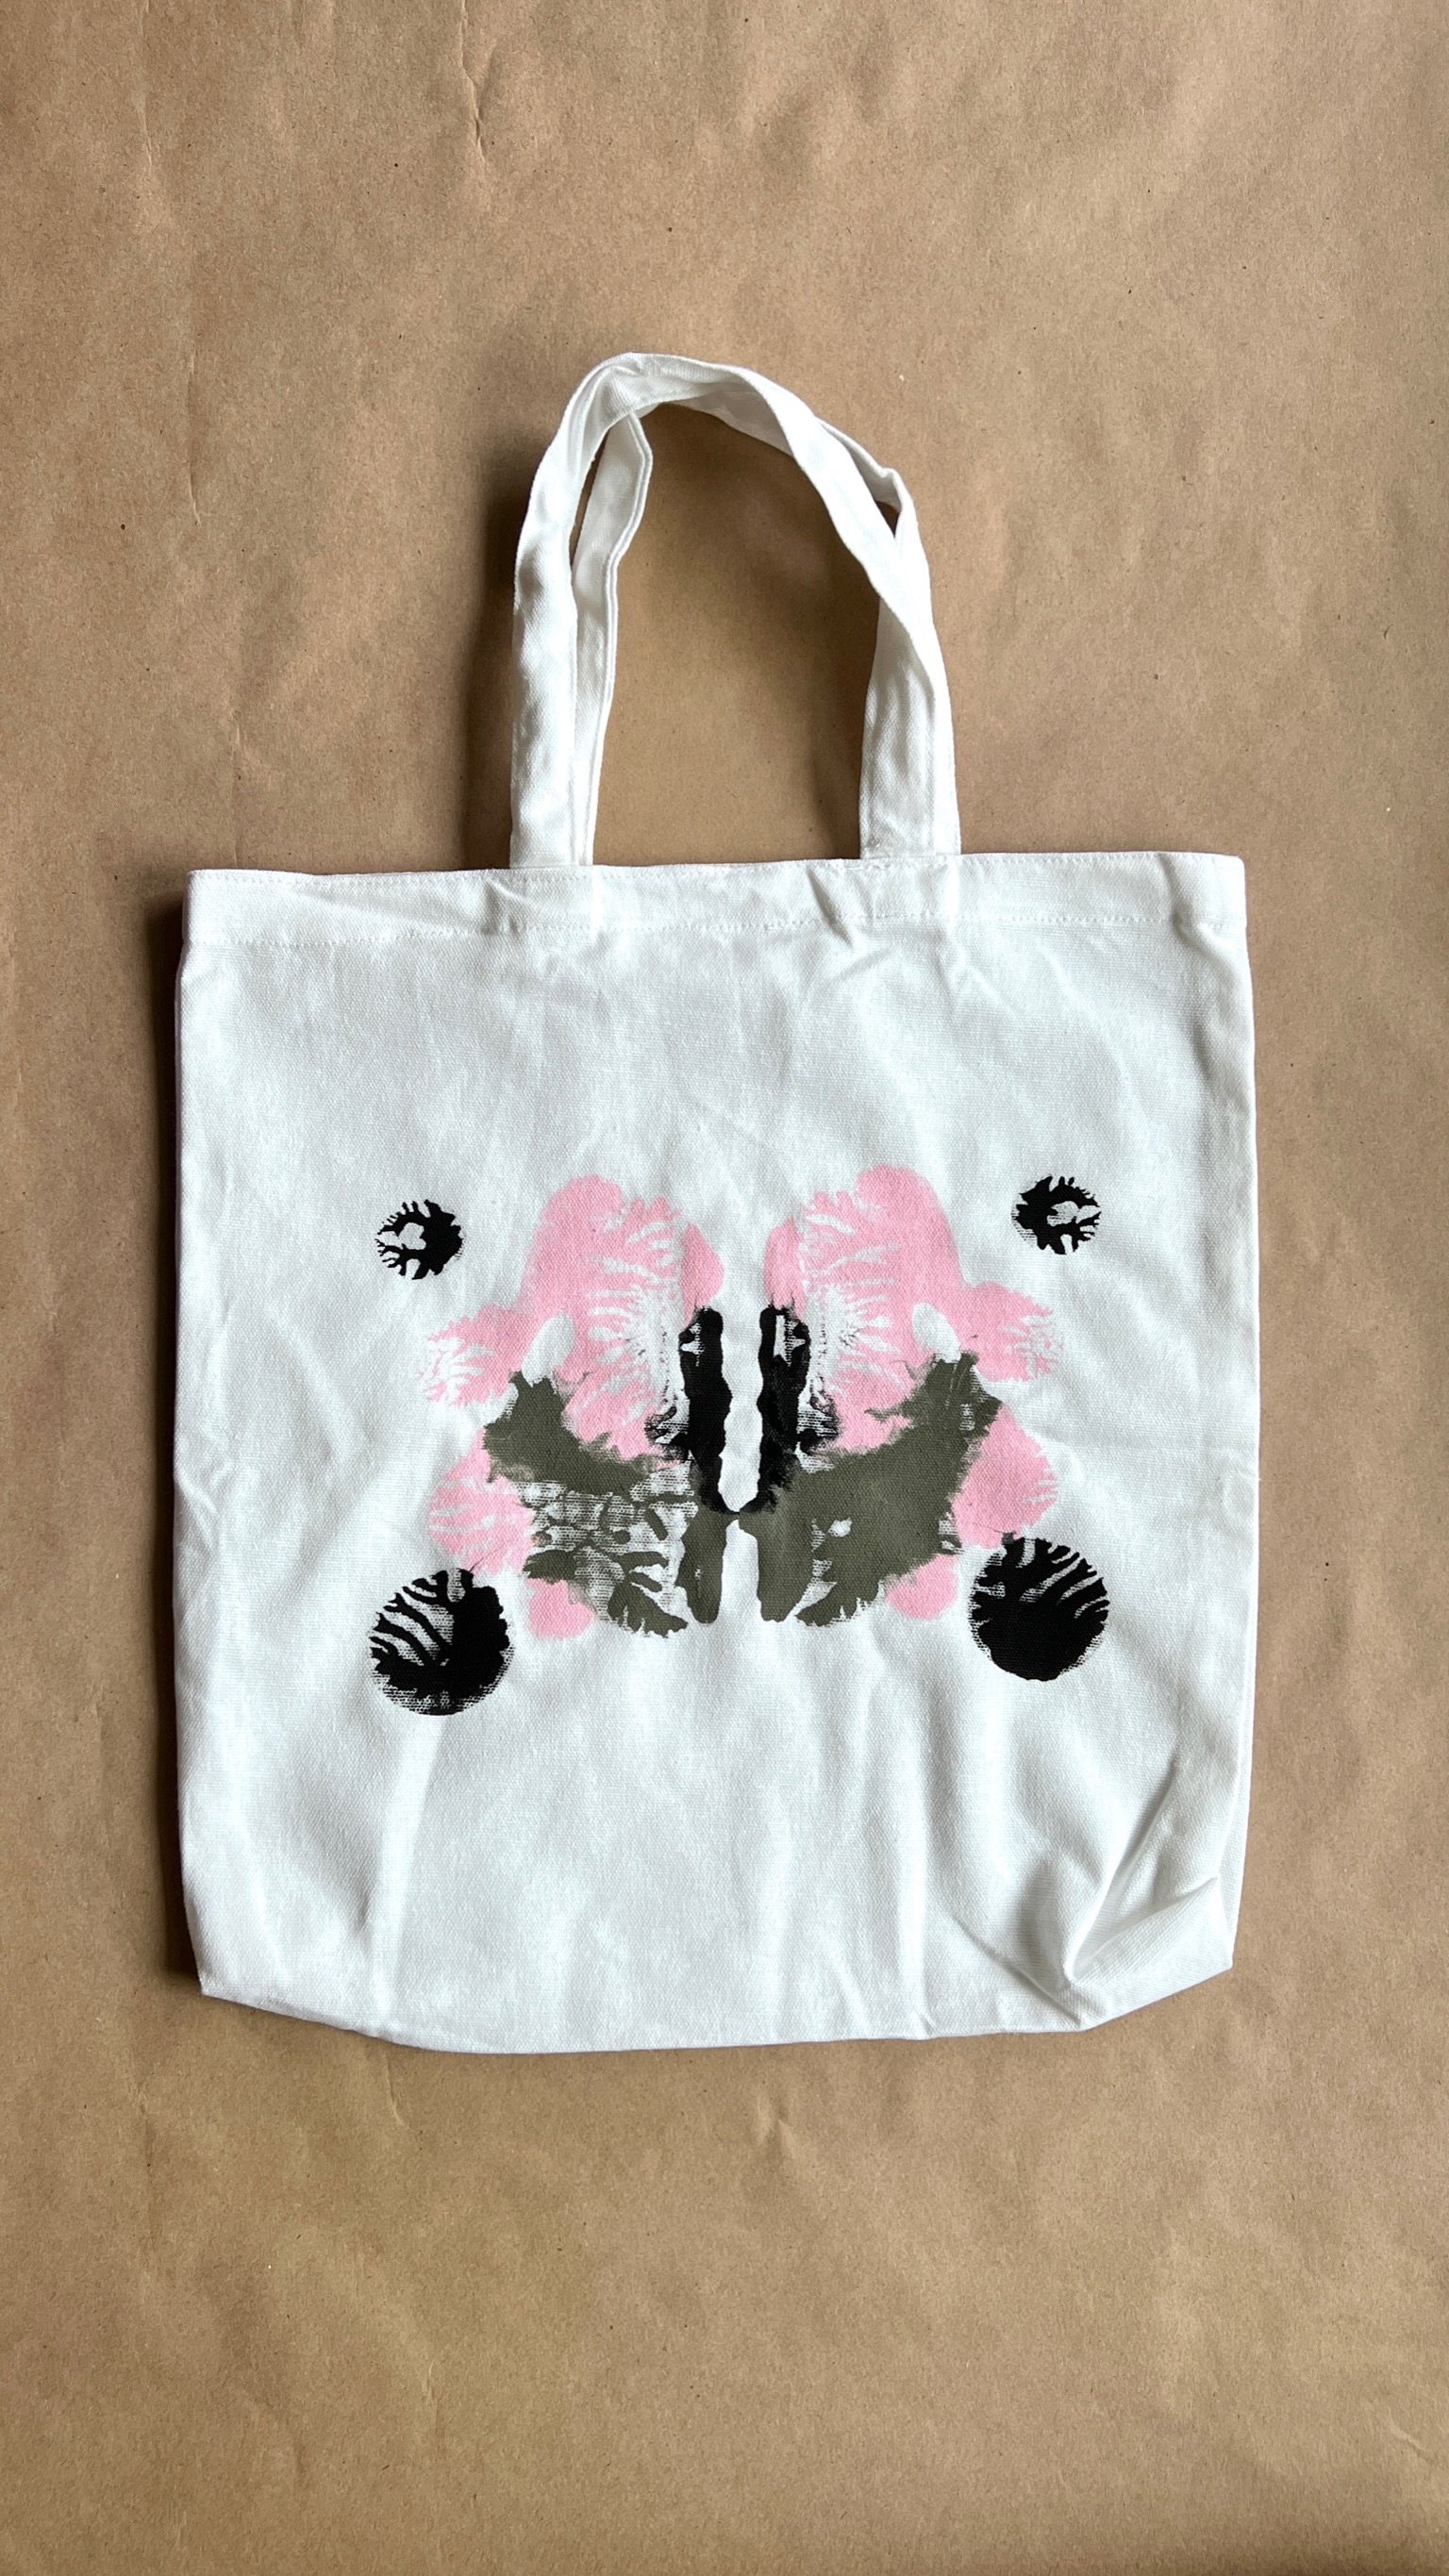 Learn How to Make an Ink Blot Tote Bag! (Our Super Fun Craft for Alt ...